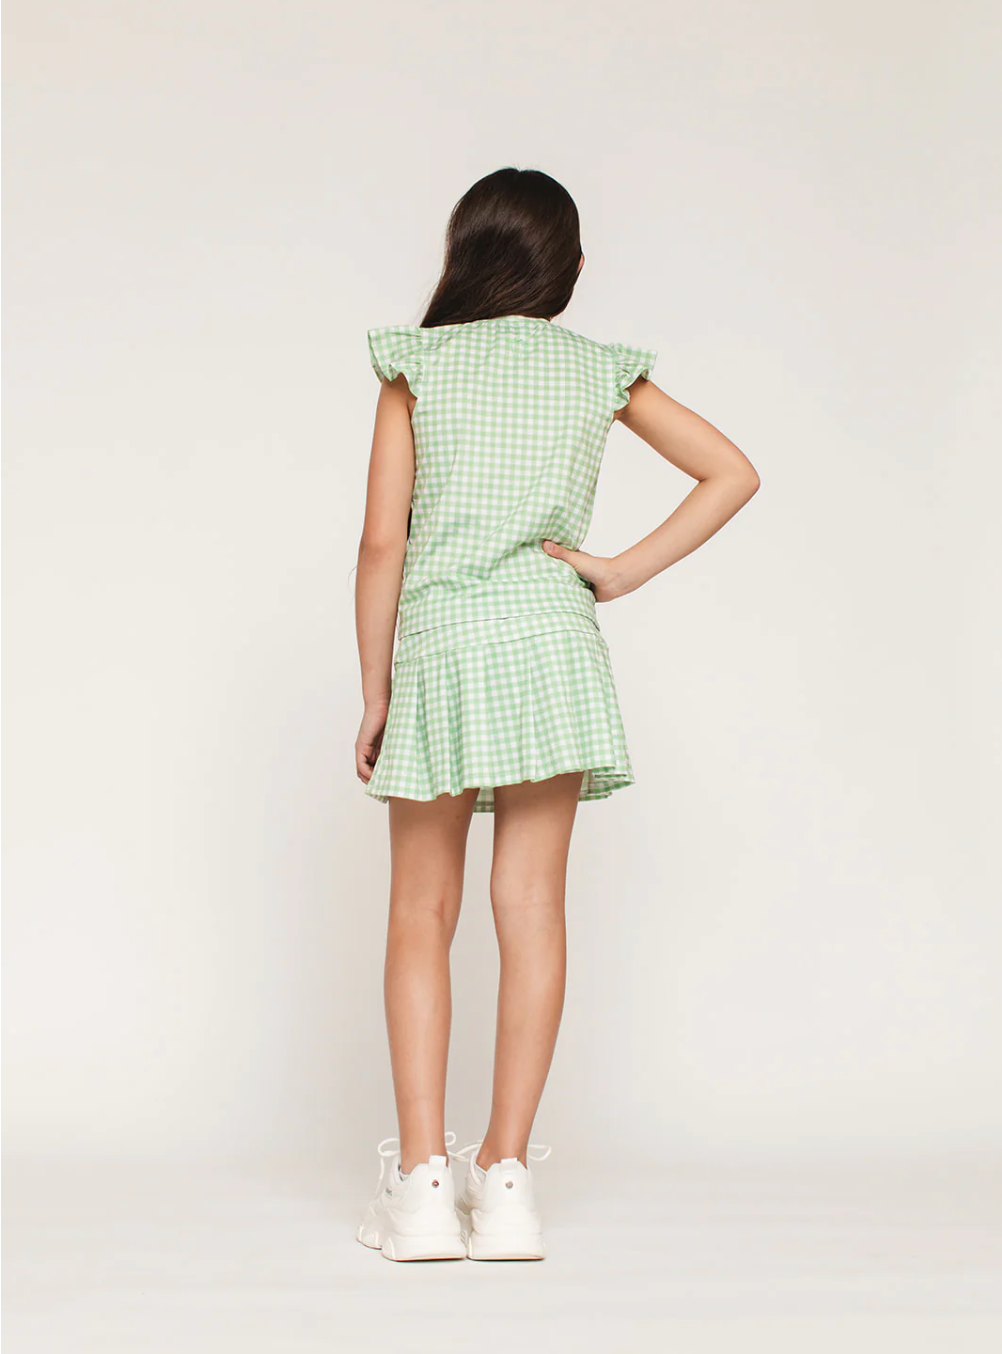 The Girl's Tennis Skirt and Top Set in Green Gingham